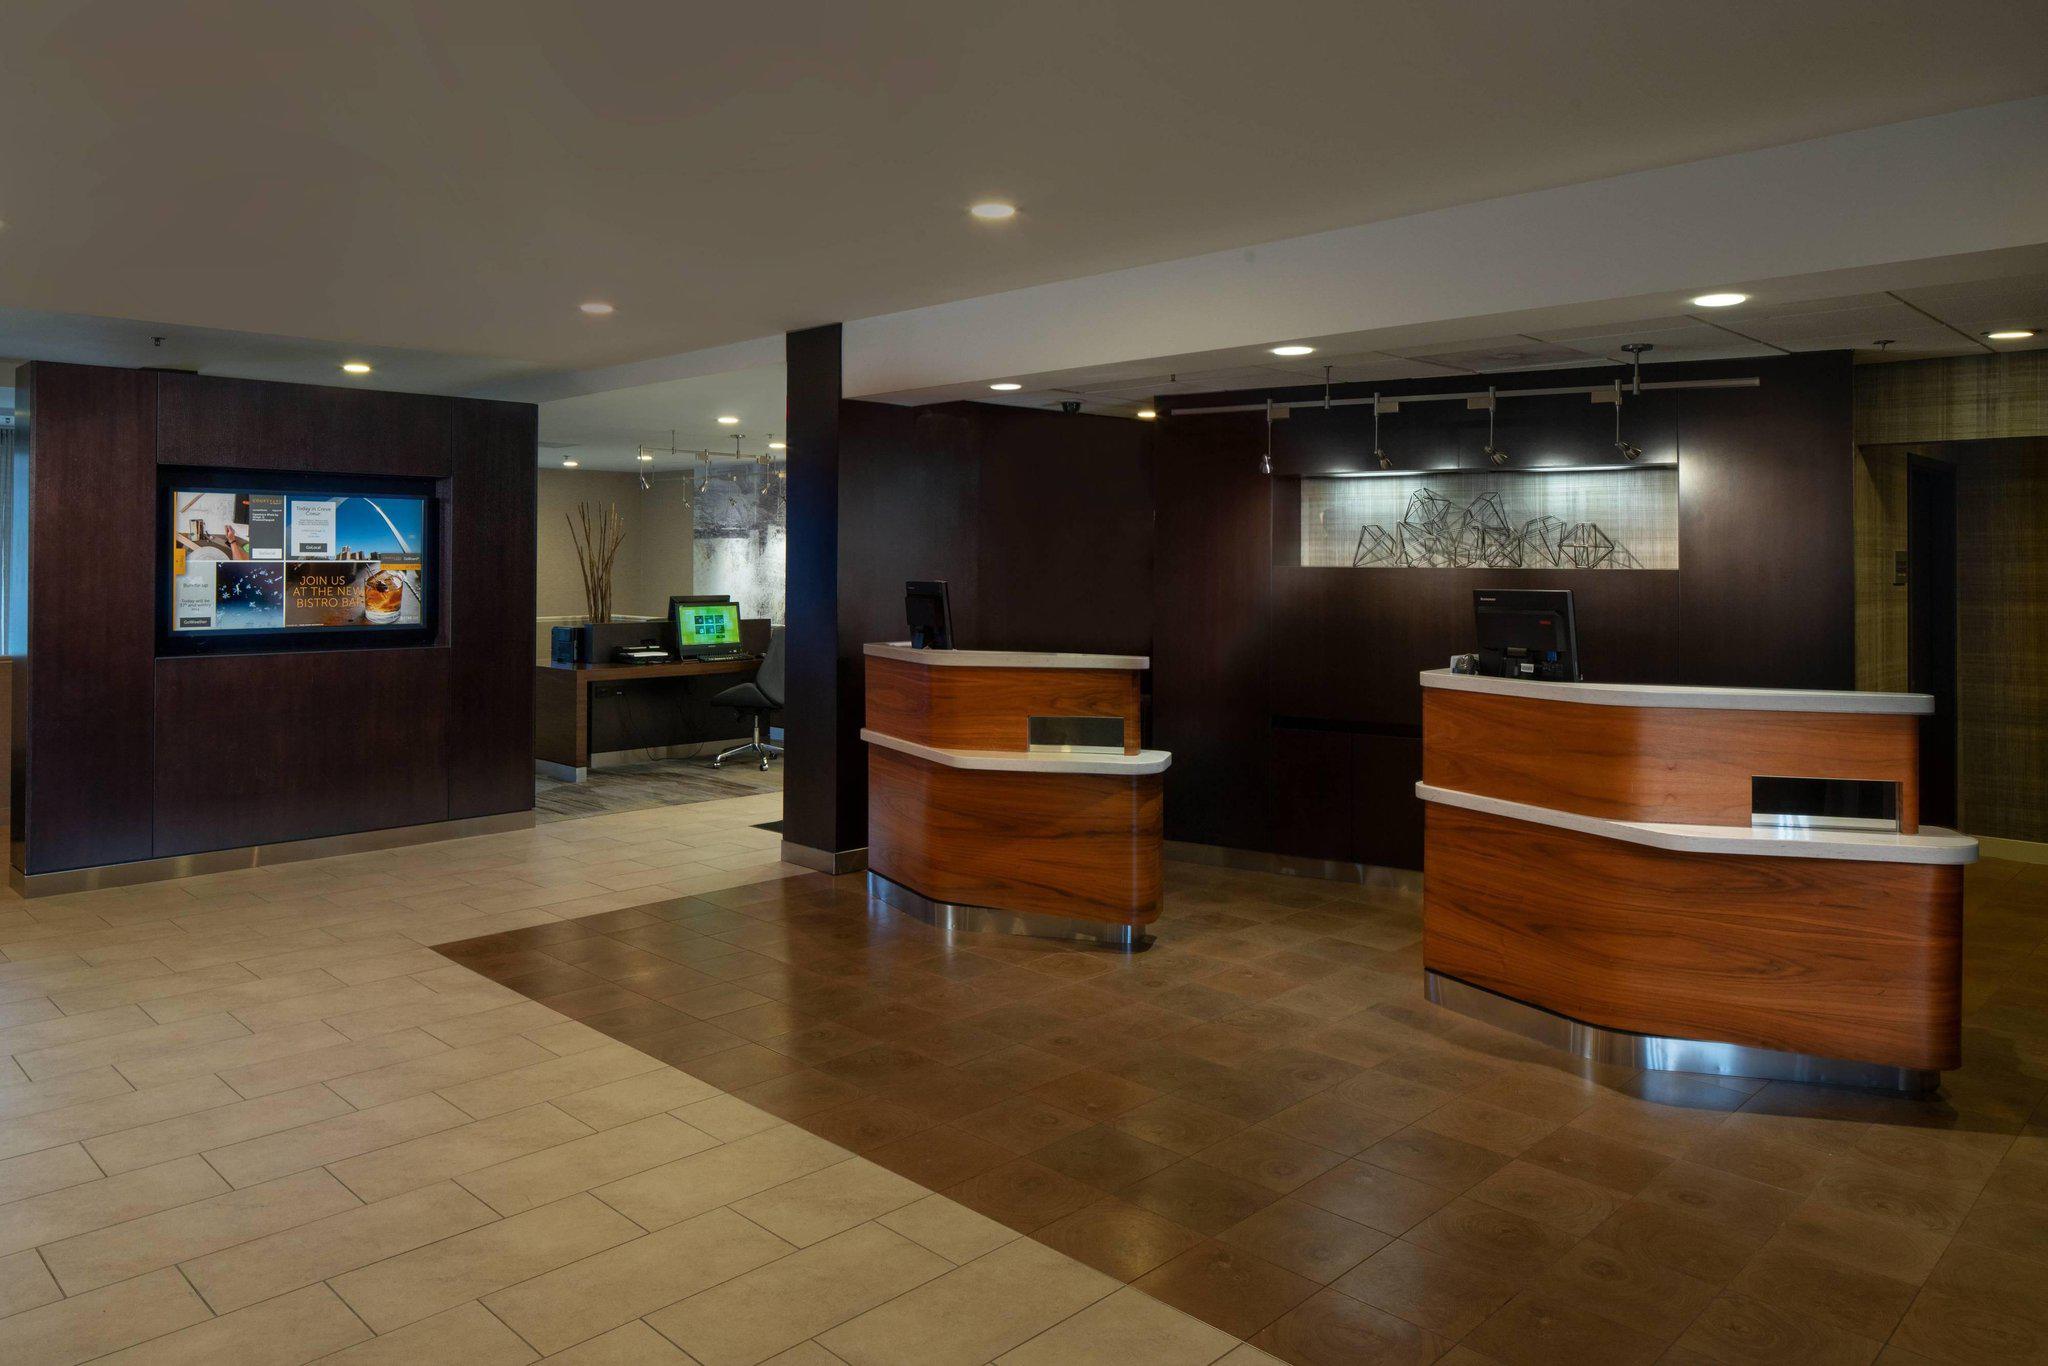 Courtyard by Marriott St. Louis Creve Coeur Coupons near me in Creve Coeur, MO 63146 | 8coupons